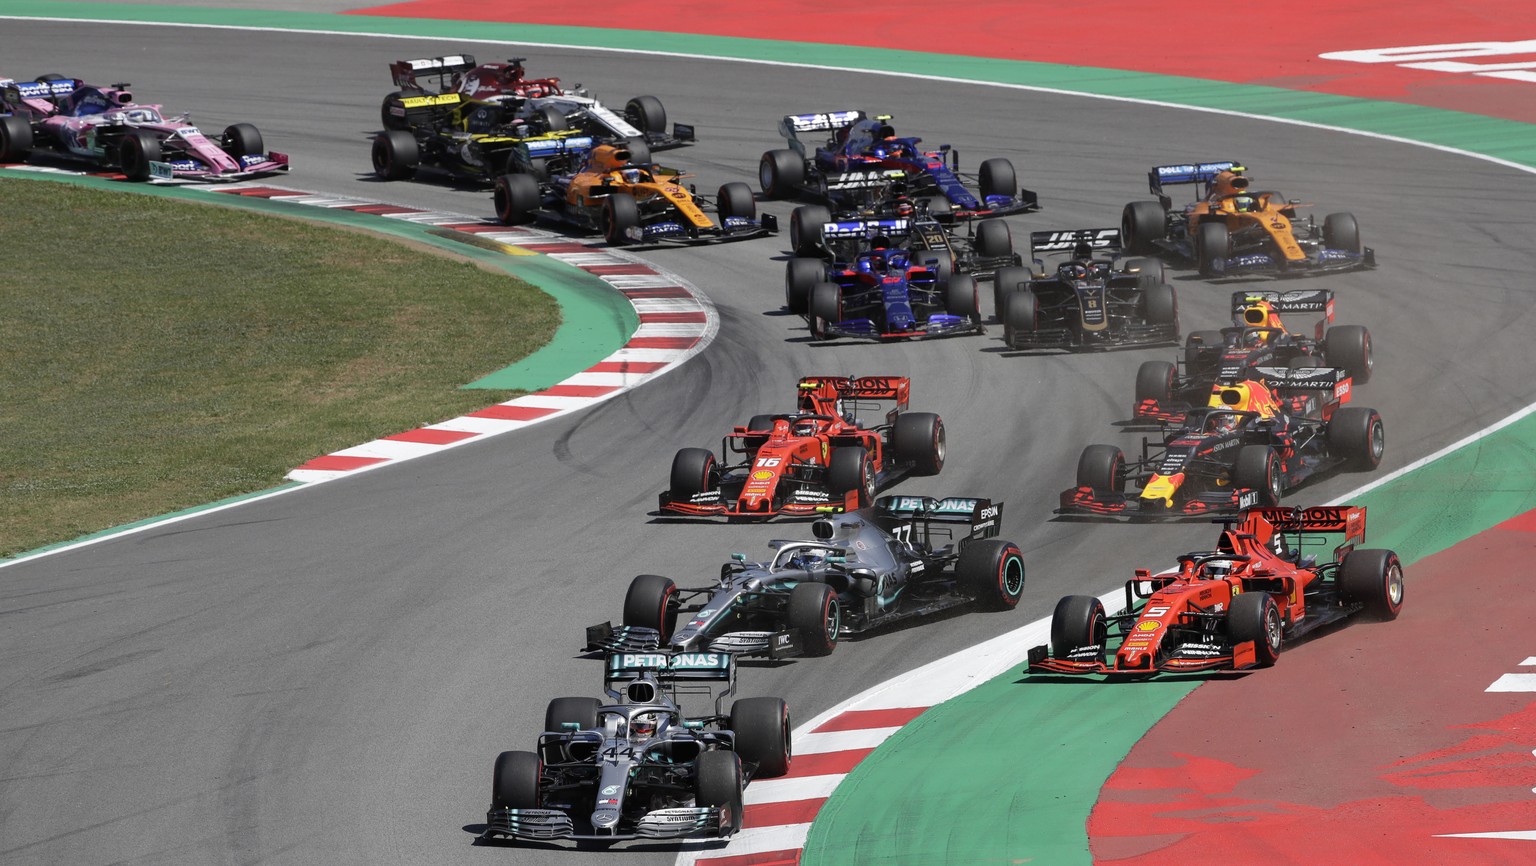 Mercedes driver Lewis Hamilton of Britain leads the field after the start during the Spanish Formula One race at the Barcelona Catalunya racetrack in Montmelo, just outside Barcelona, Spain, Sunday, M ...